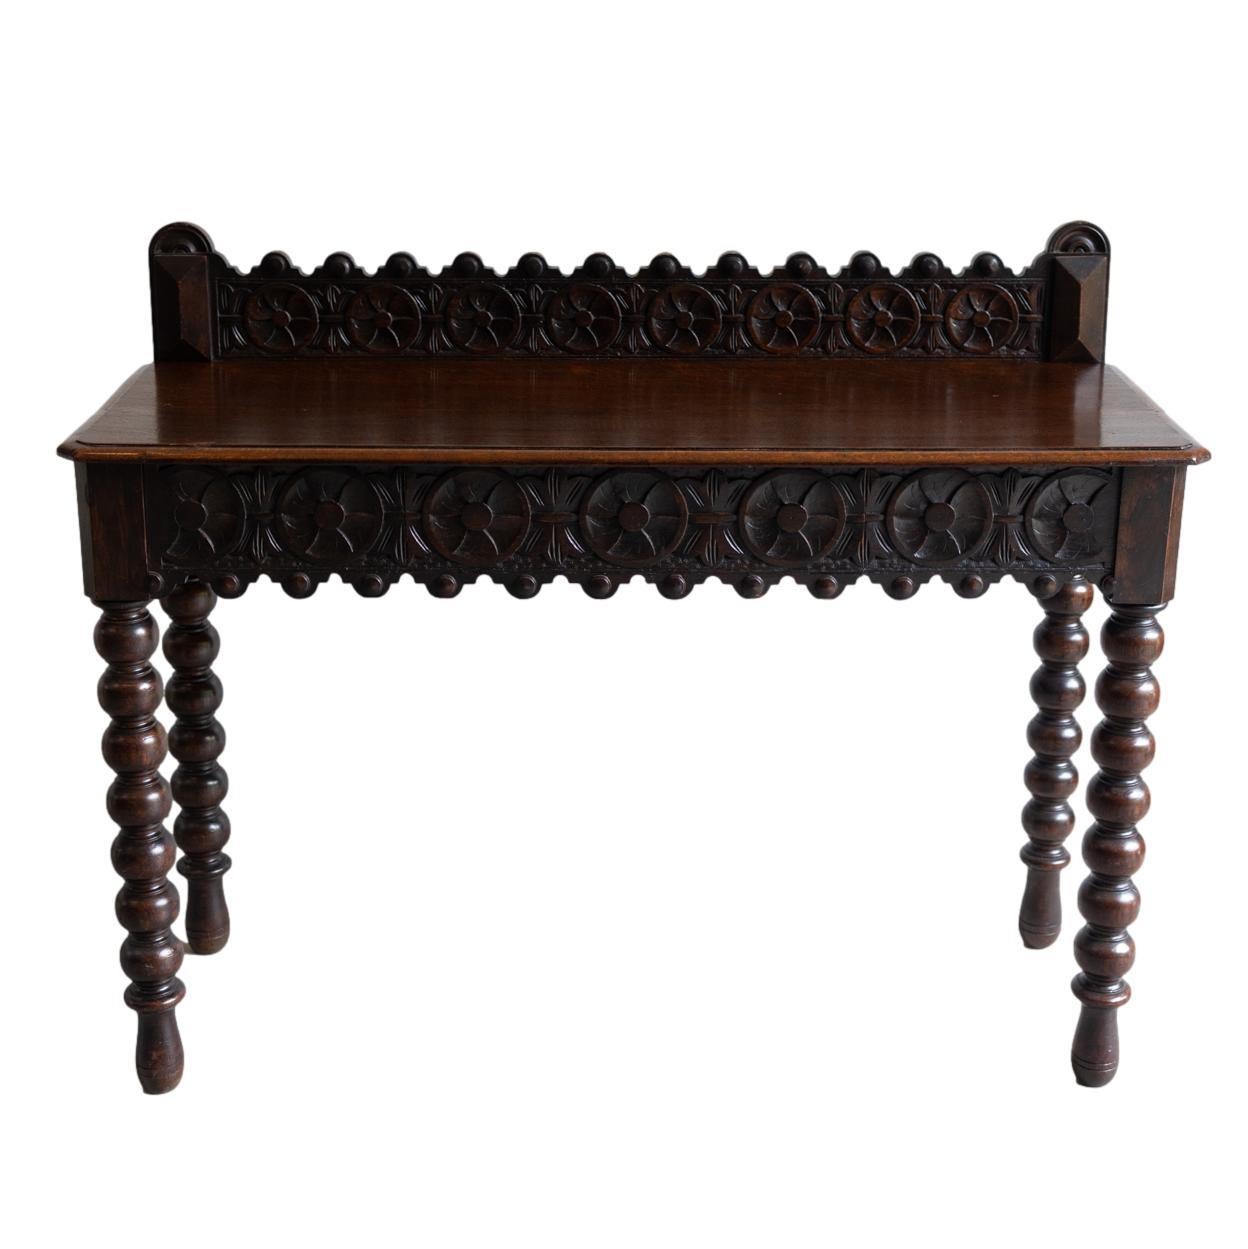 A Gothic Revival Hand-Carved Oak Console Table, elaborately carved with Gothic tracery, the top with canted corners, with a central hidden 16-inch frieze drawer, on bobbin-turned legs, English, ca. 1870.  